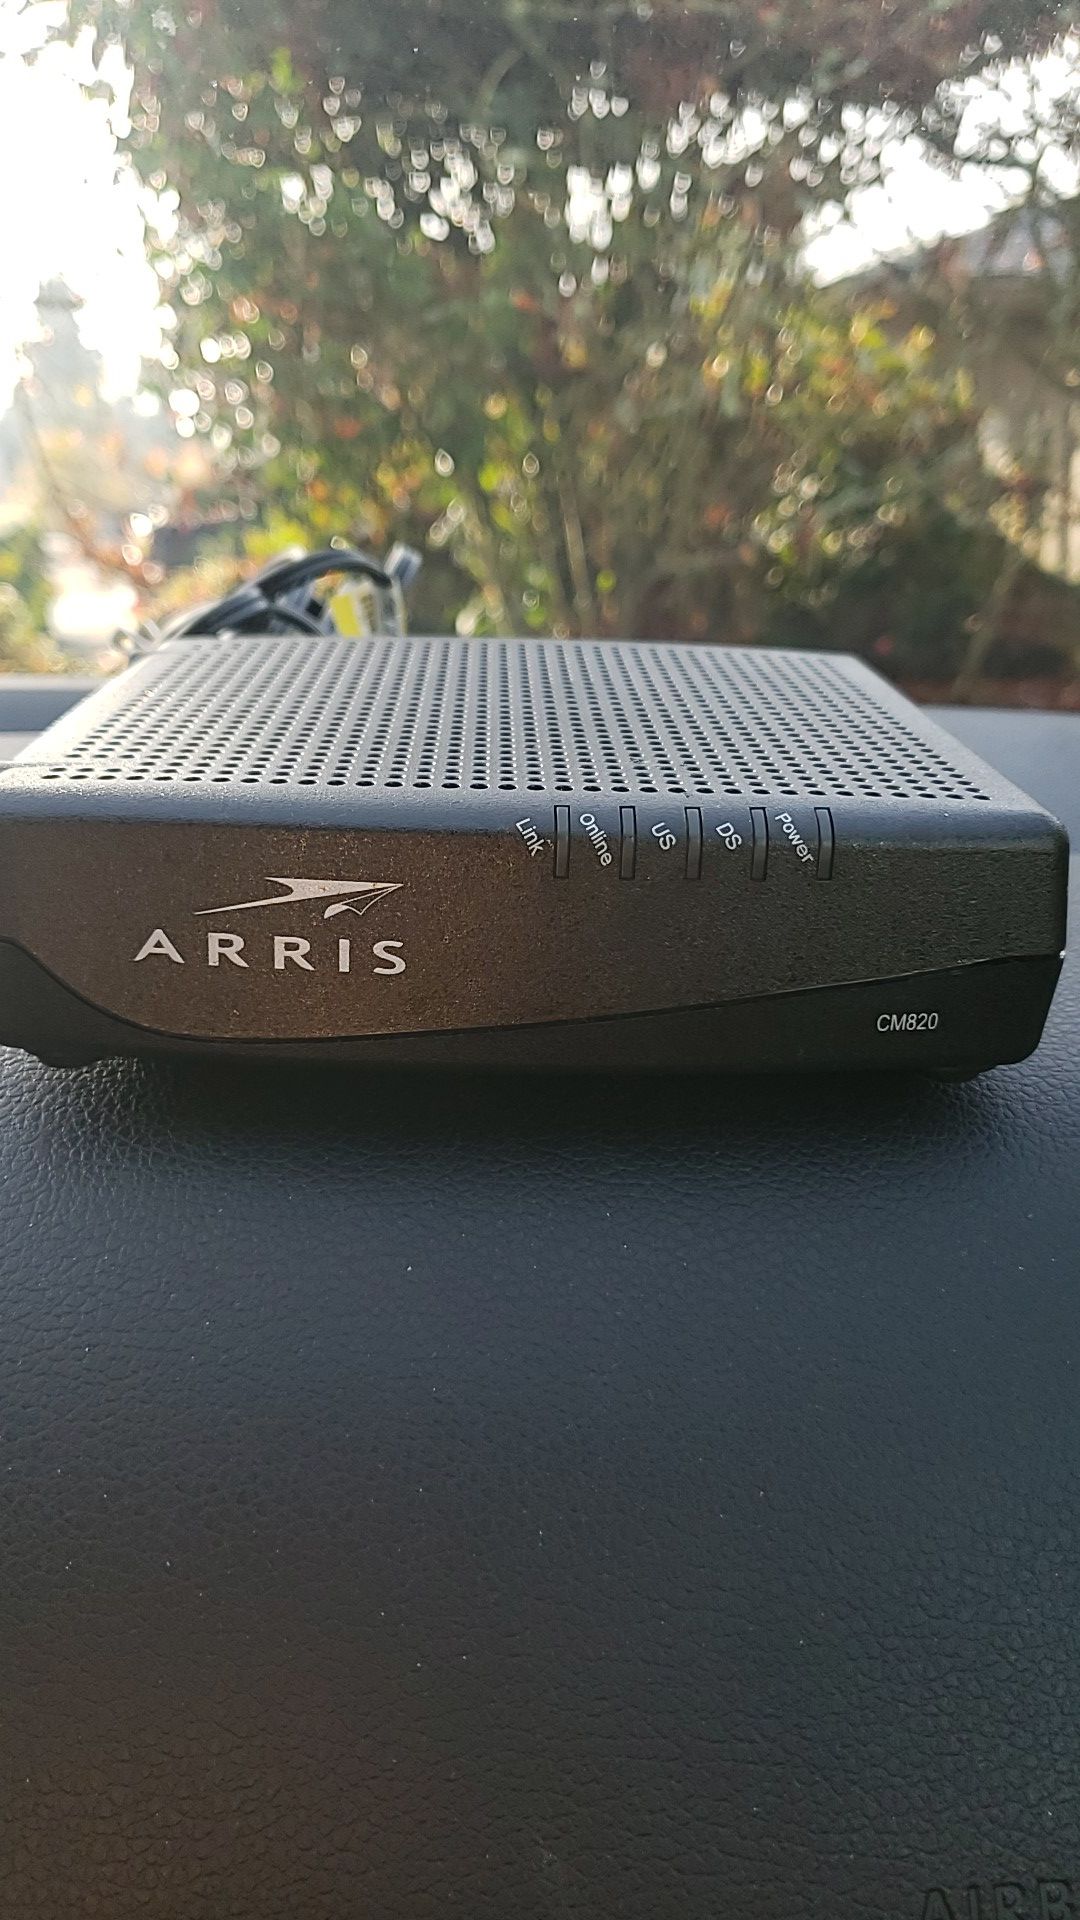 Arris Cable Modem. Used but in good working order.